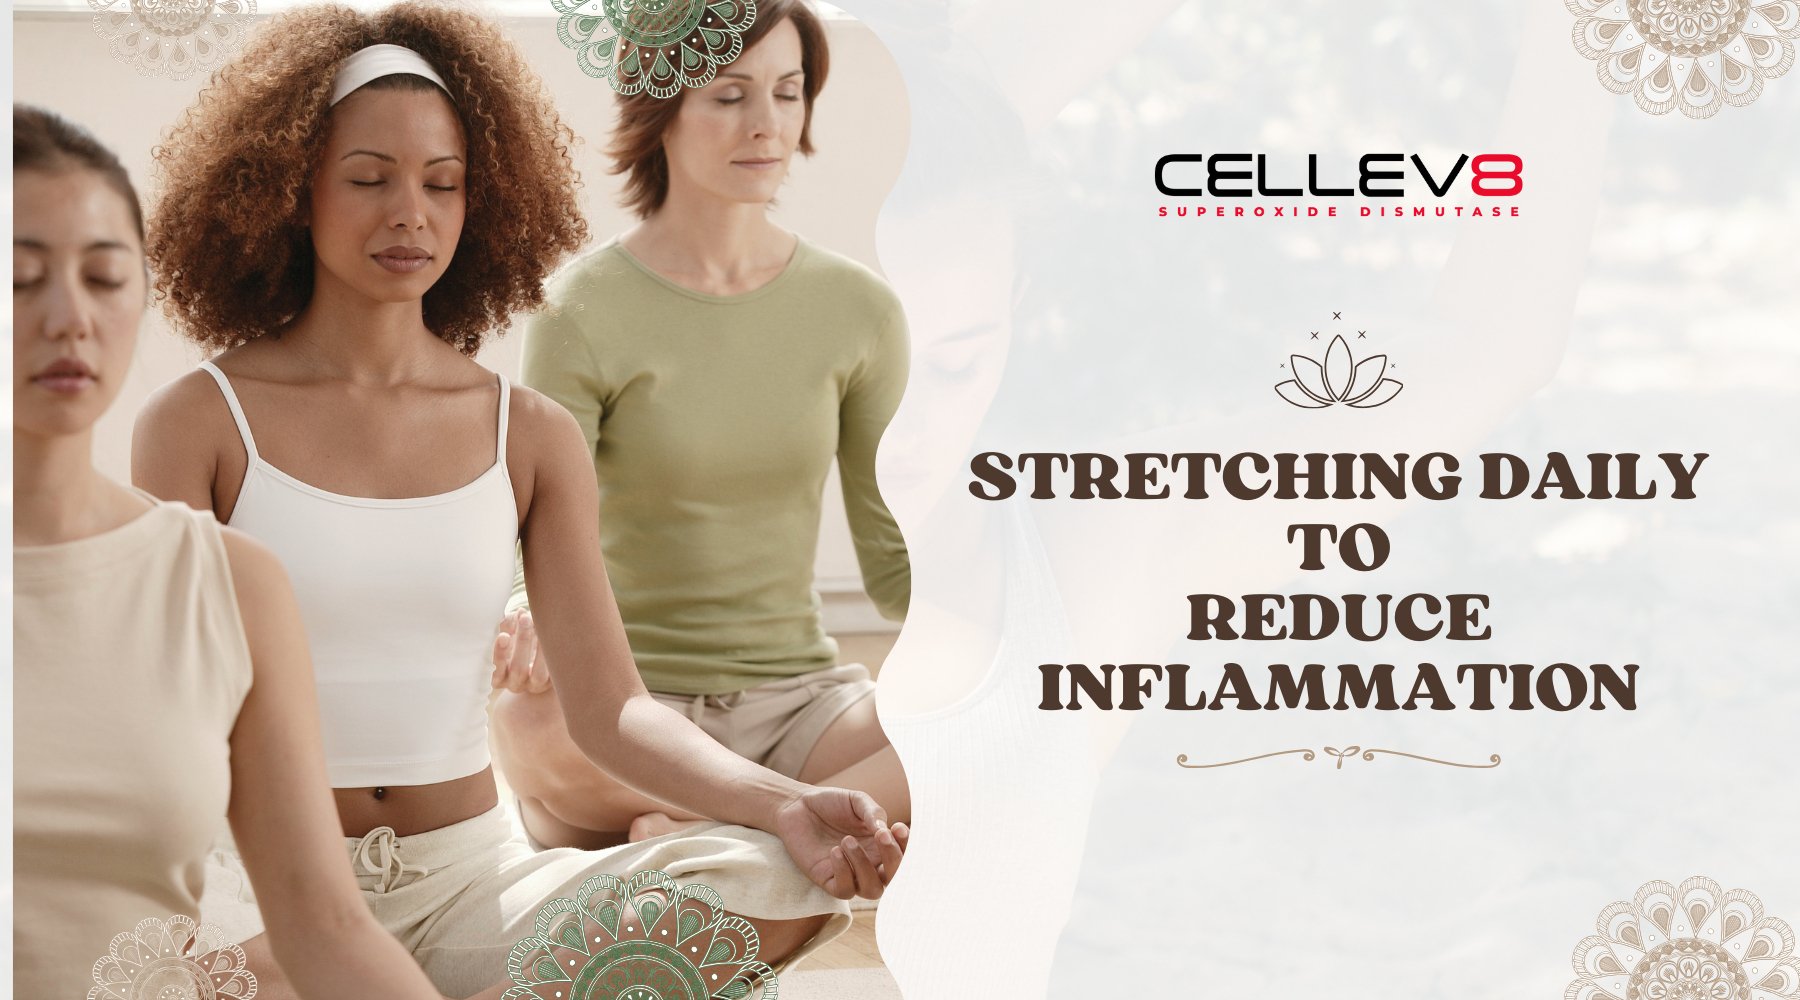 Stretching Daily To Reduce Inflammation - Cellev8